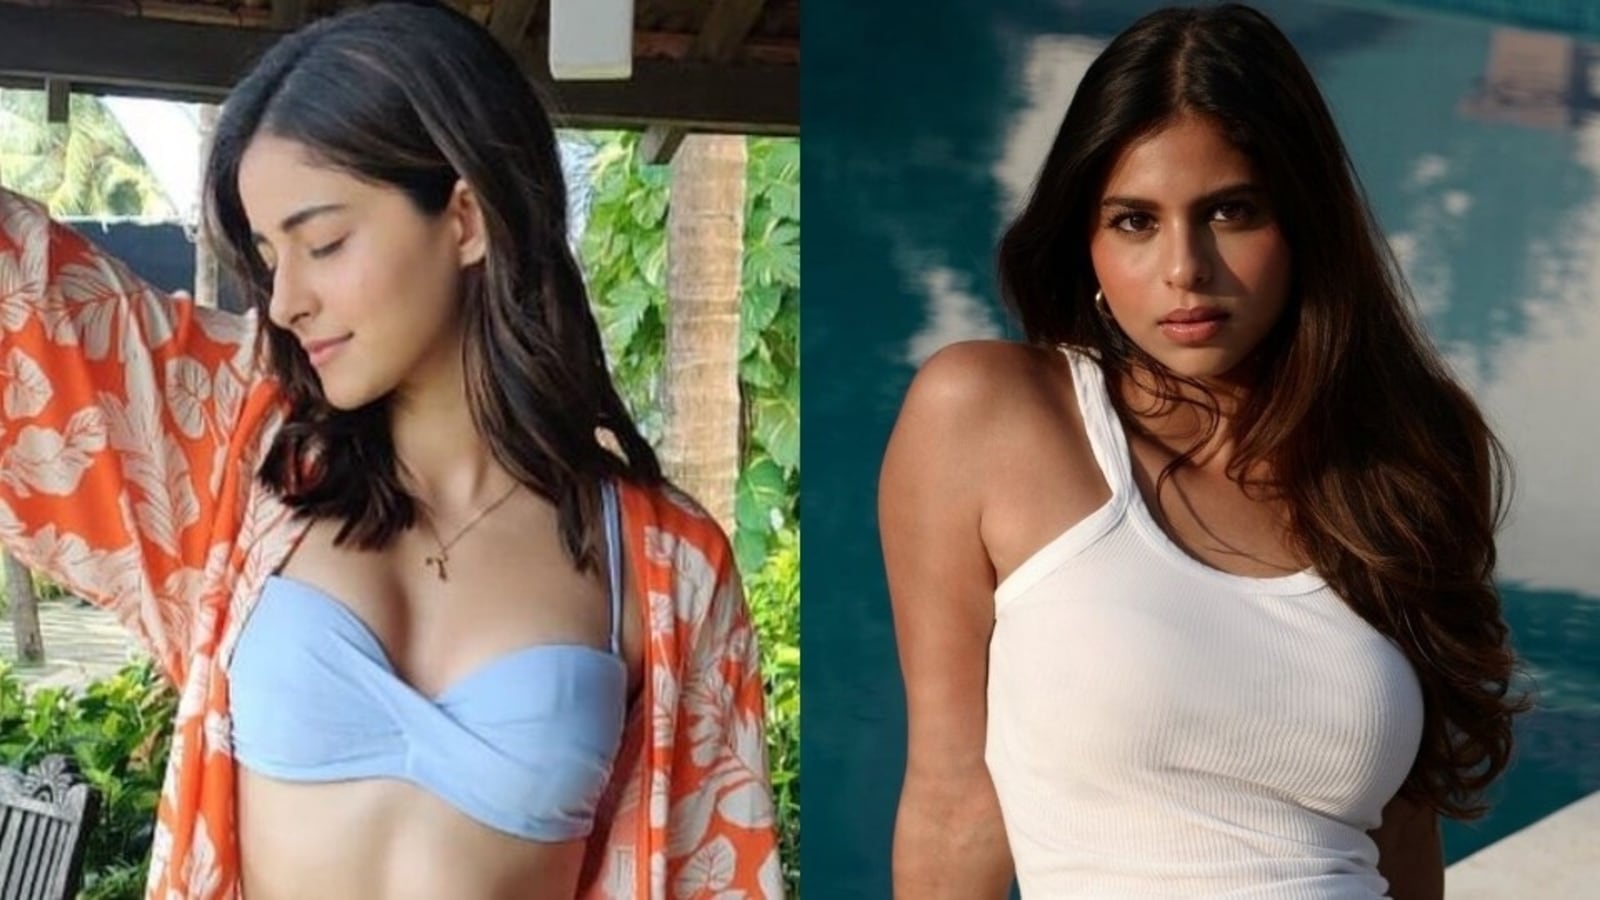 Ananya Panday is a trendy beach babe in bikini pics from Gehraiyaan days, Suhana Khan says ‘oh wow’: Check out here